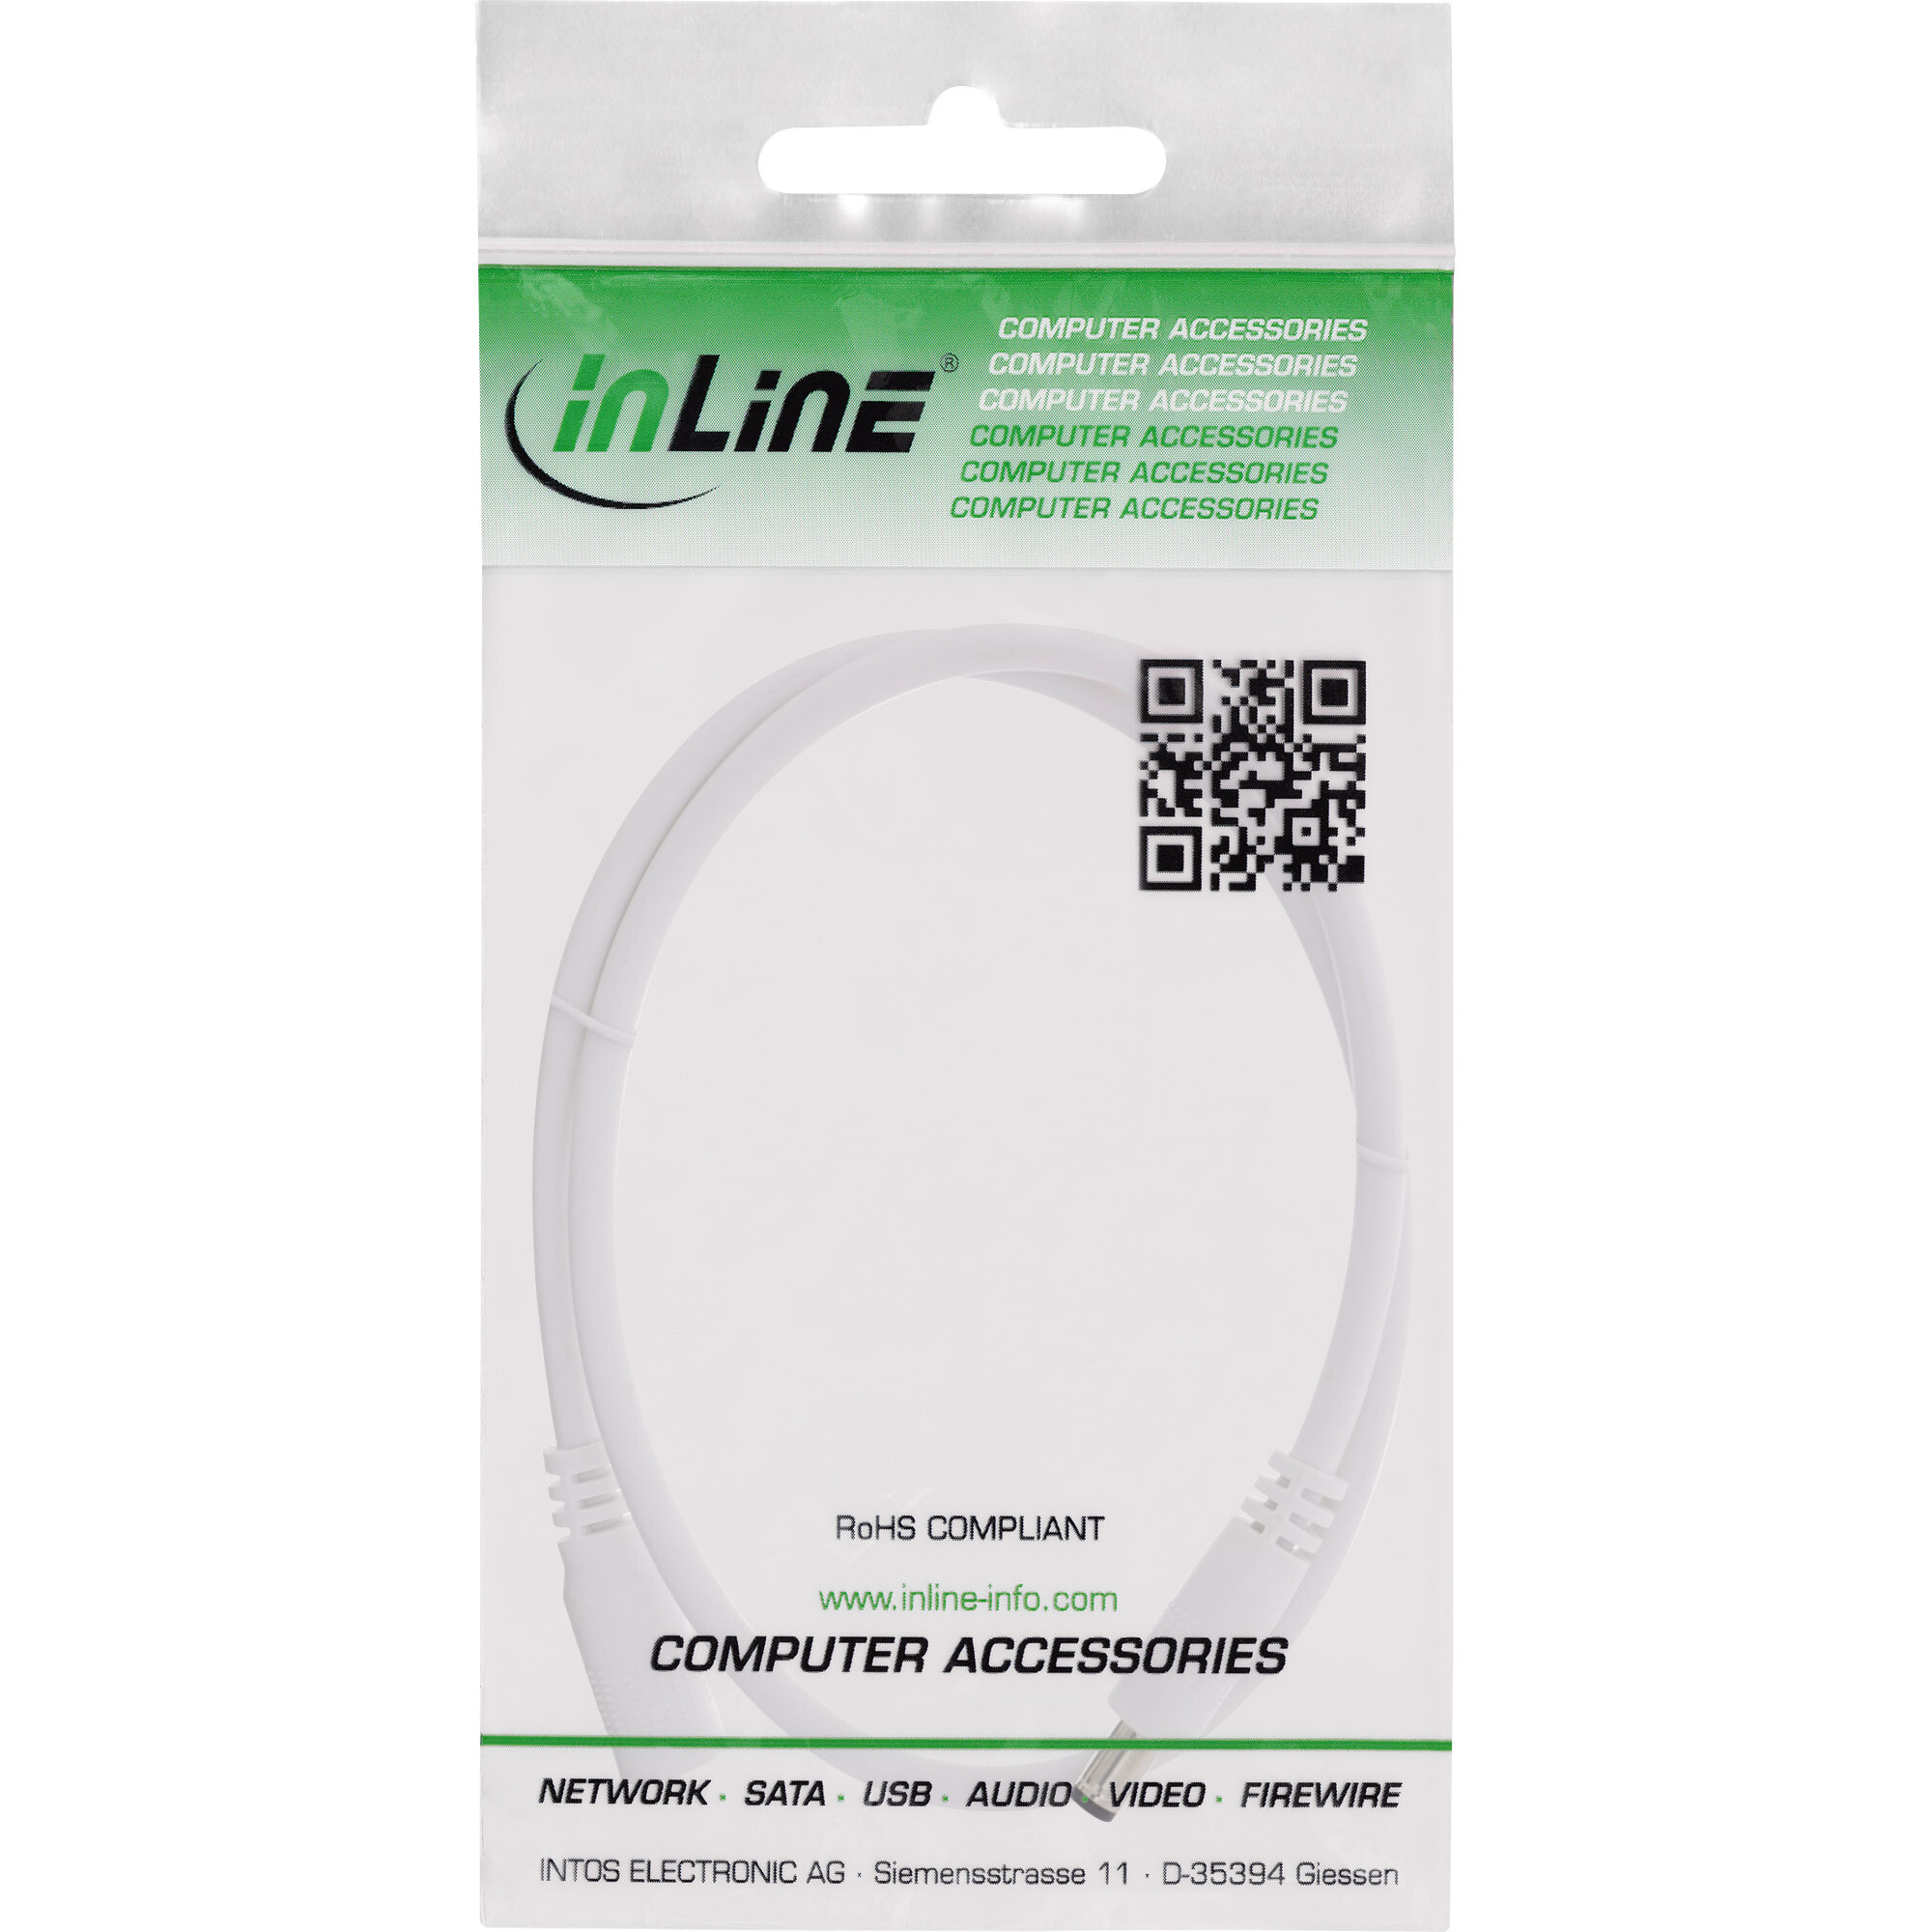 DC extension cable - DC male/female 5.5x2.5mm - AWG 18 - white 2m